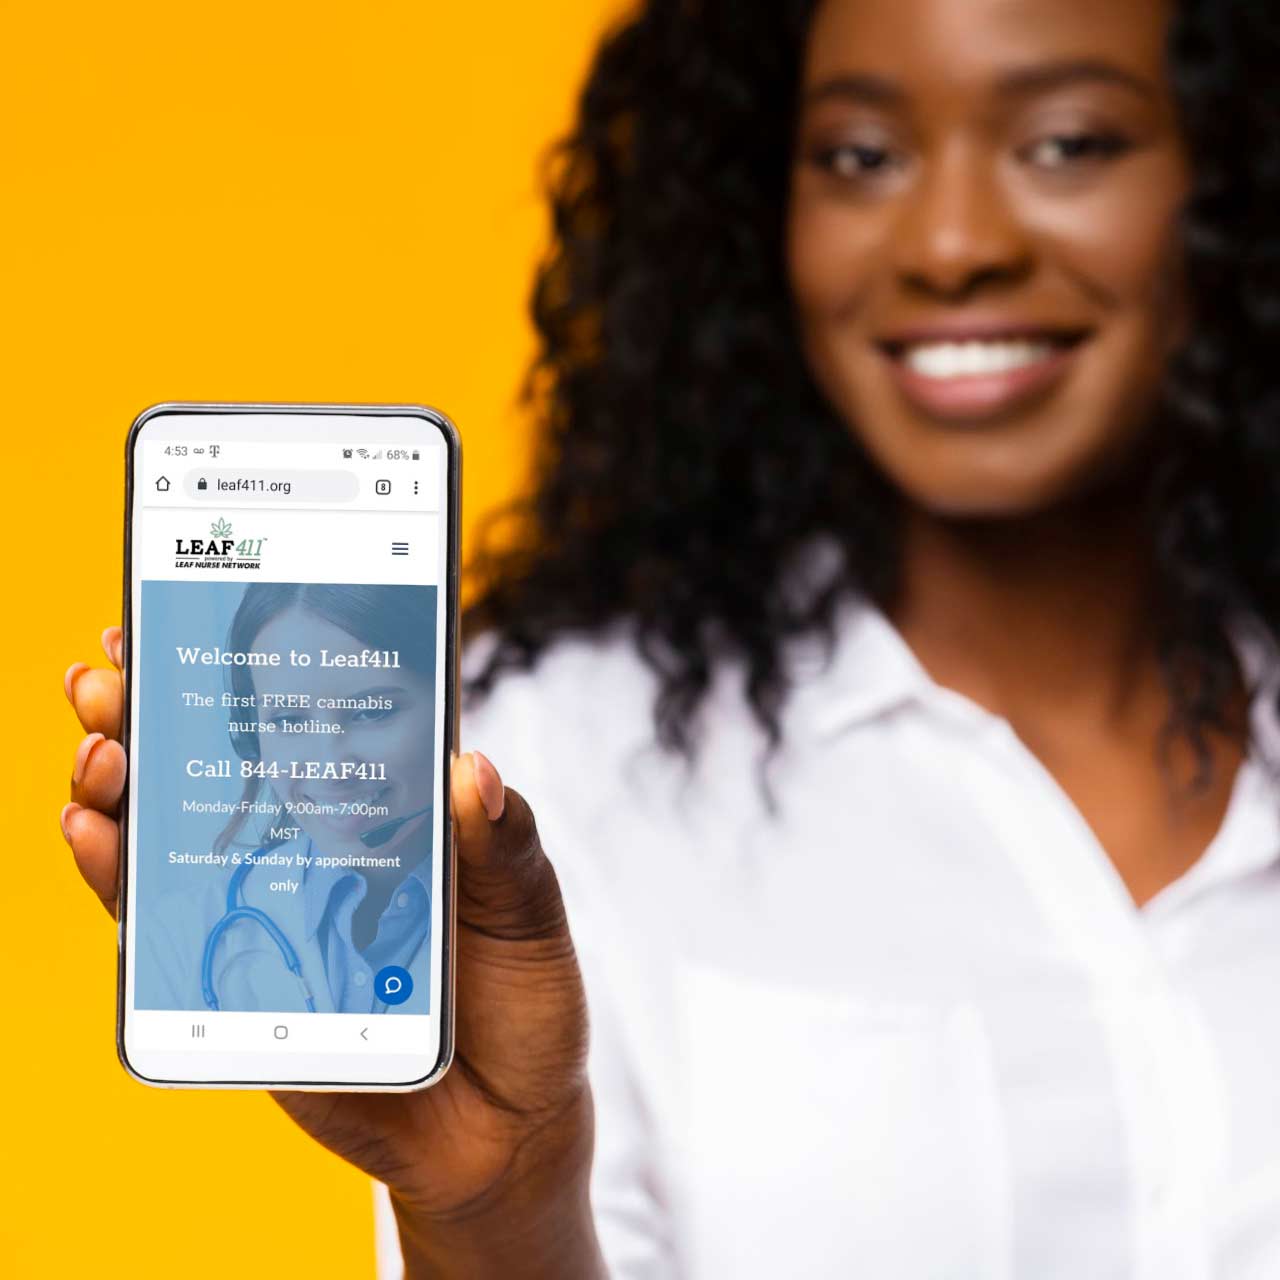 Smiling Black woman holding out smartphone with the Leaf411 cannabis nurse hotline homepage shown.